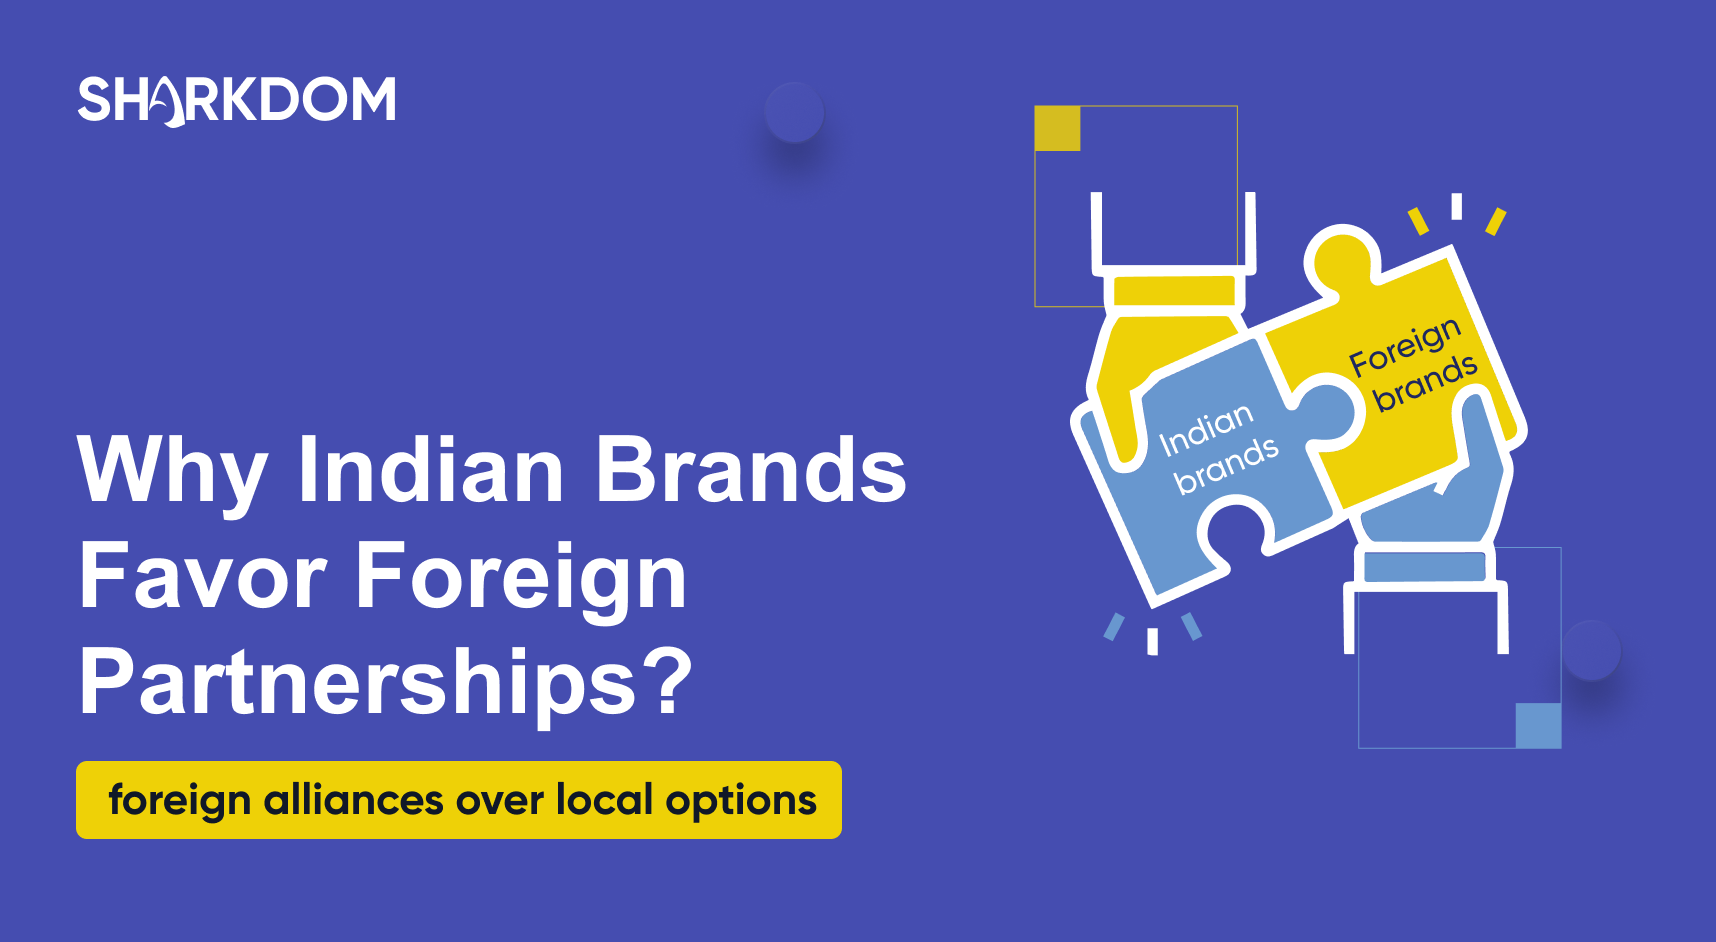 Why Do Indian Brands Prefer Foreign Partnerships Despite Equal Benefits from Domestic Counterparts?